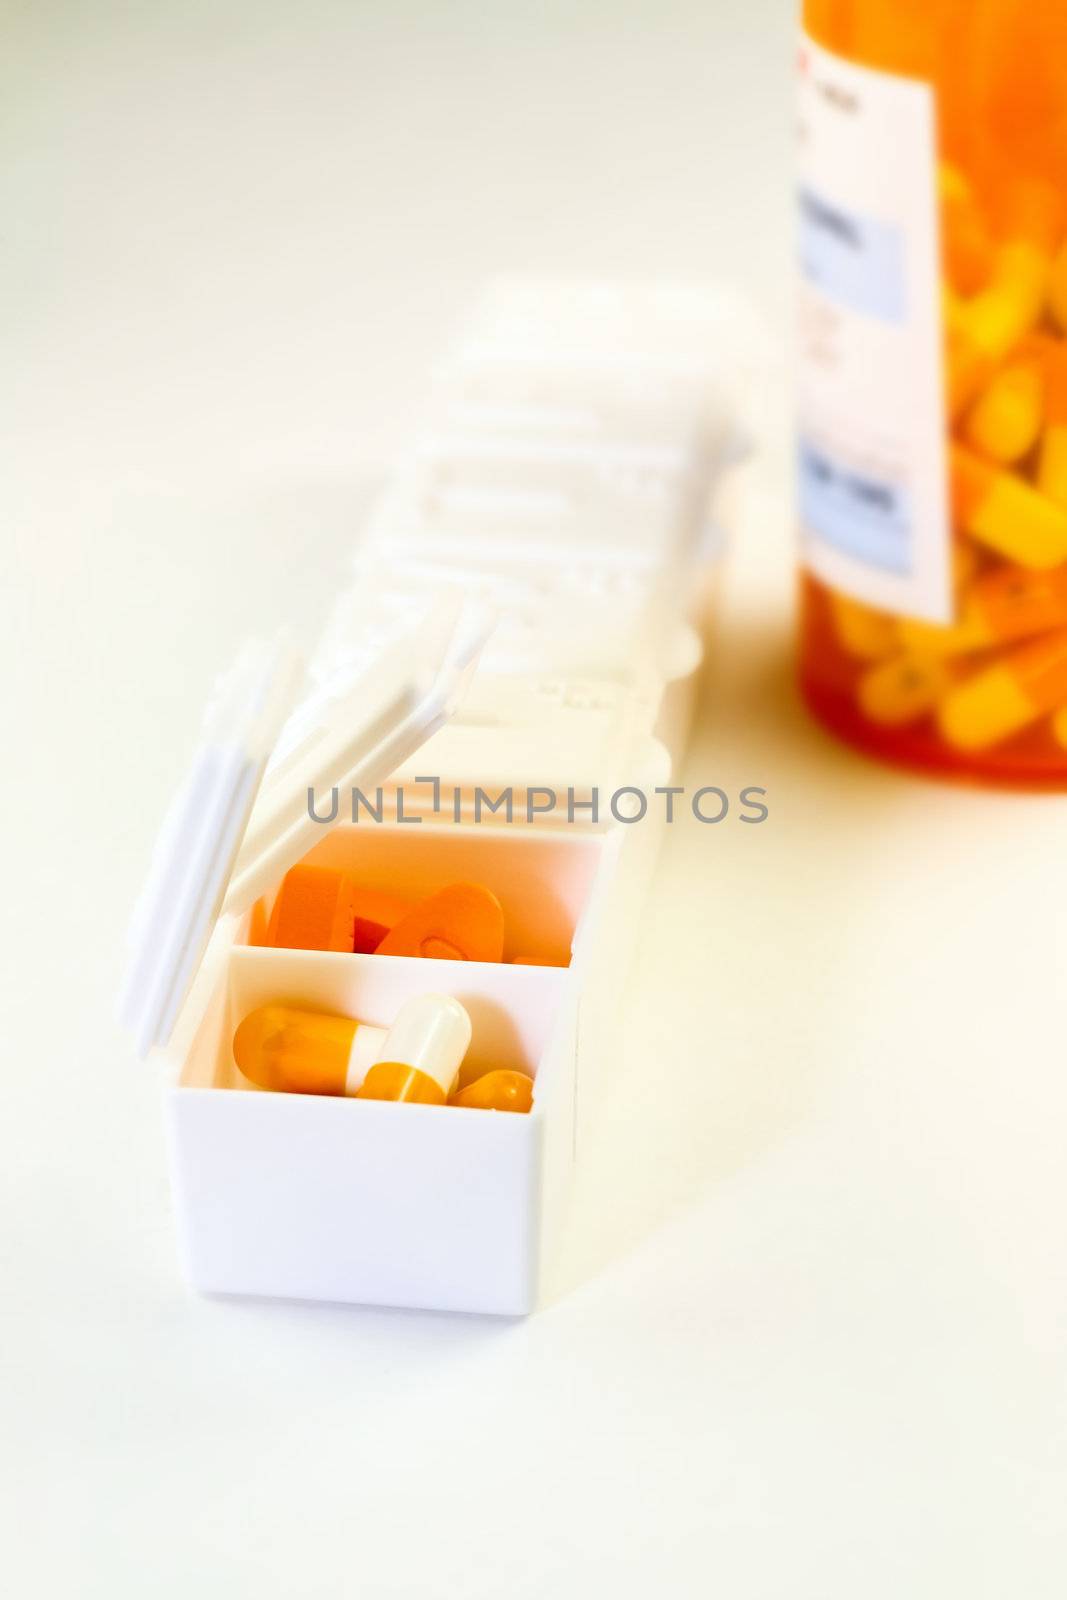 The prescription medication -  a conceptual image on health, cost, and medical insurance